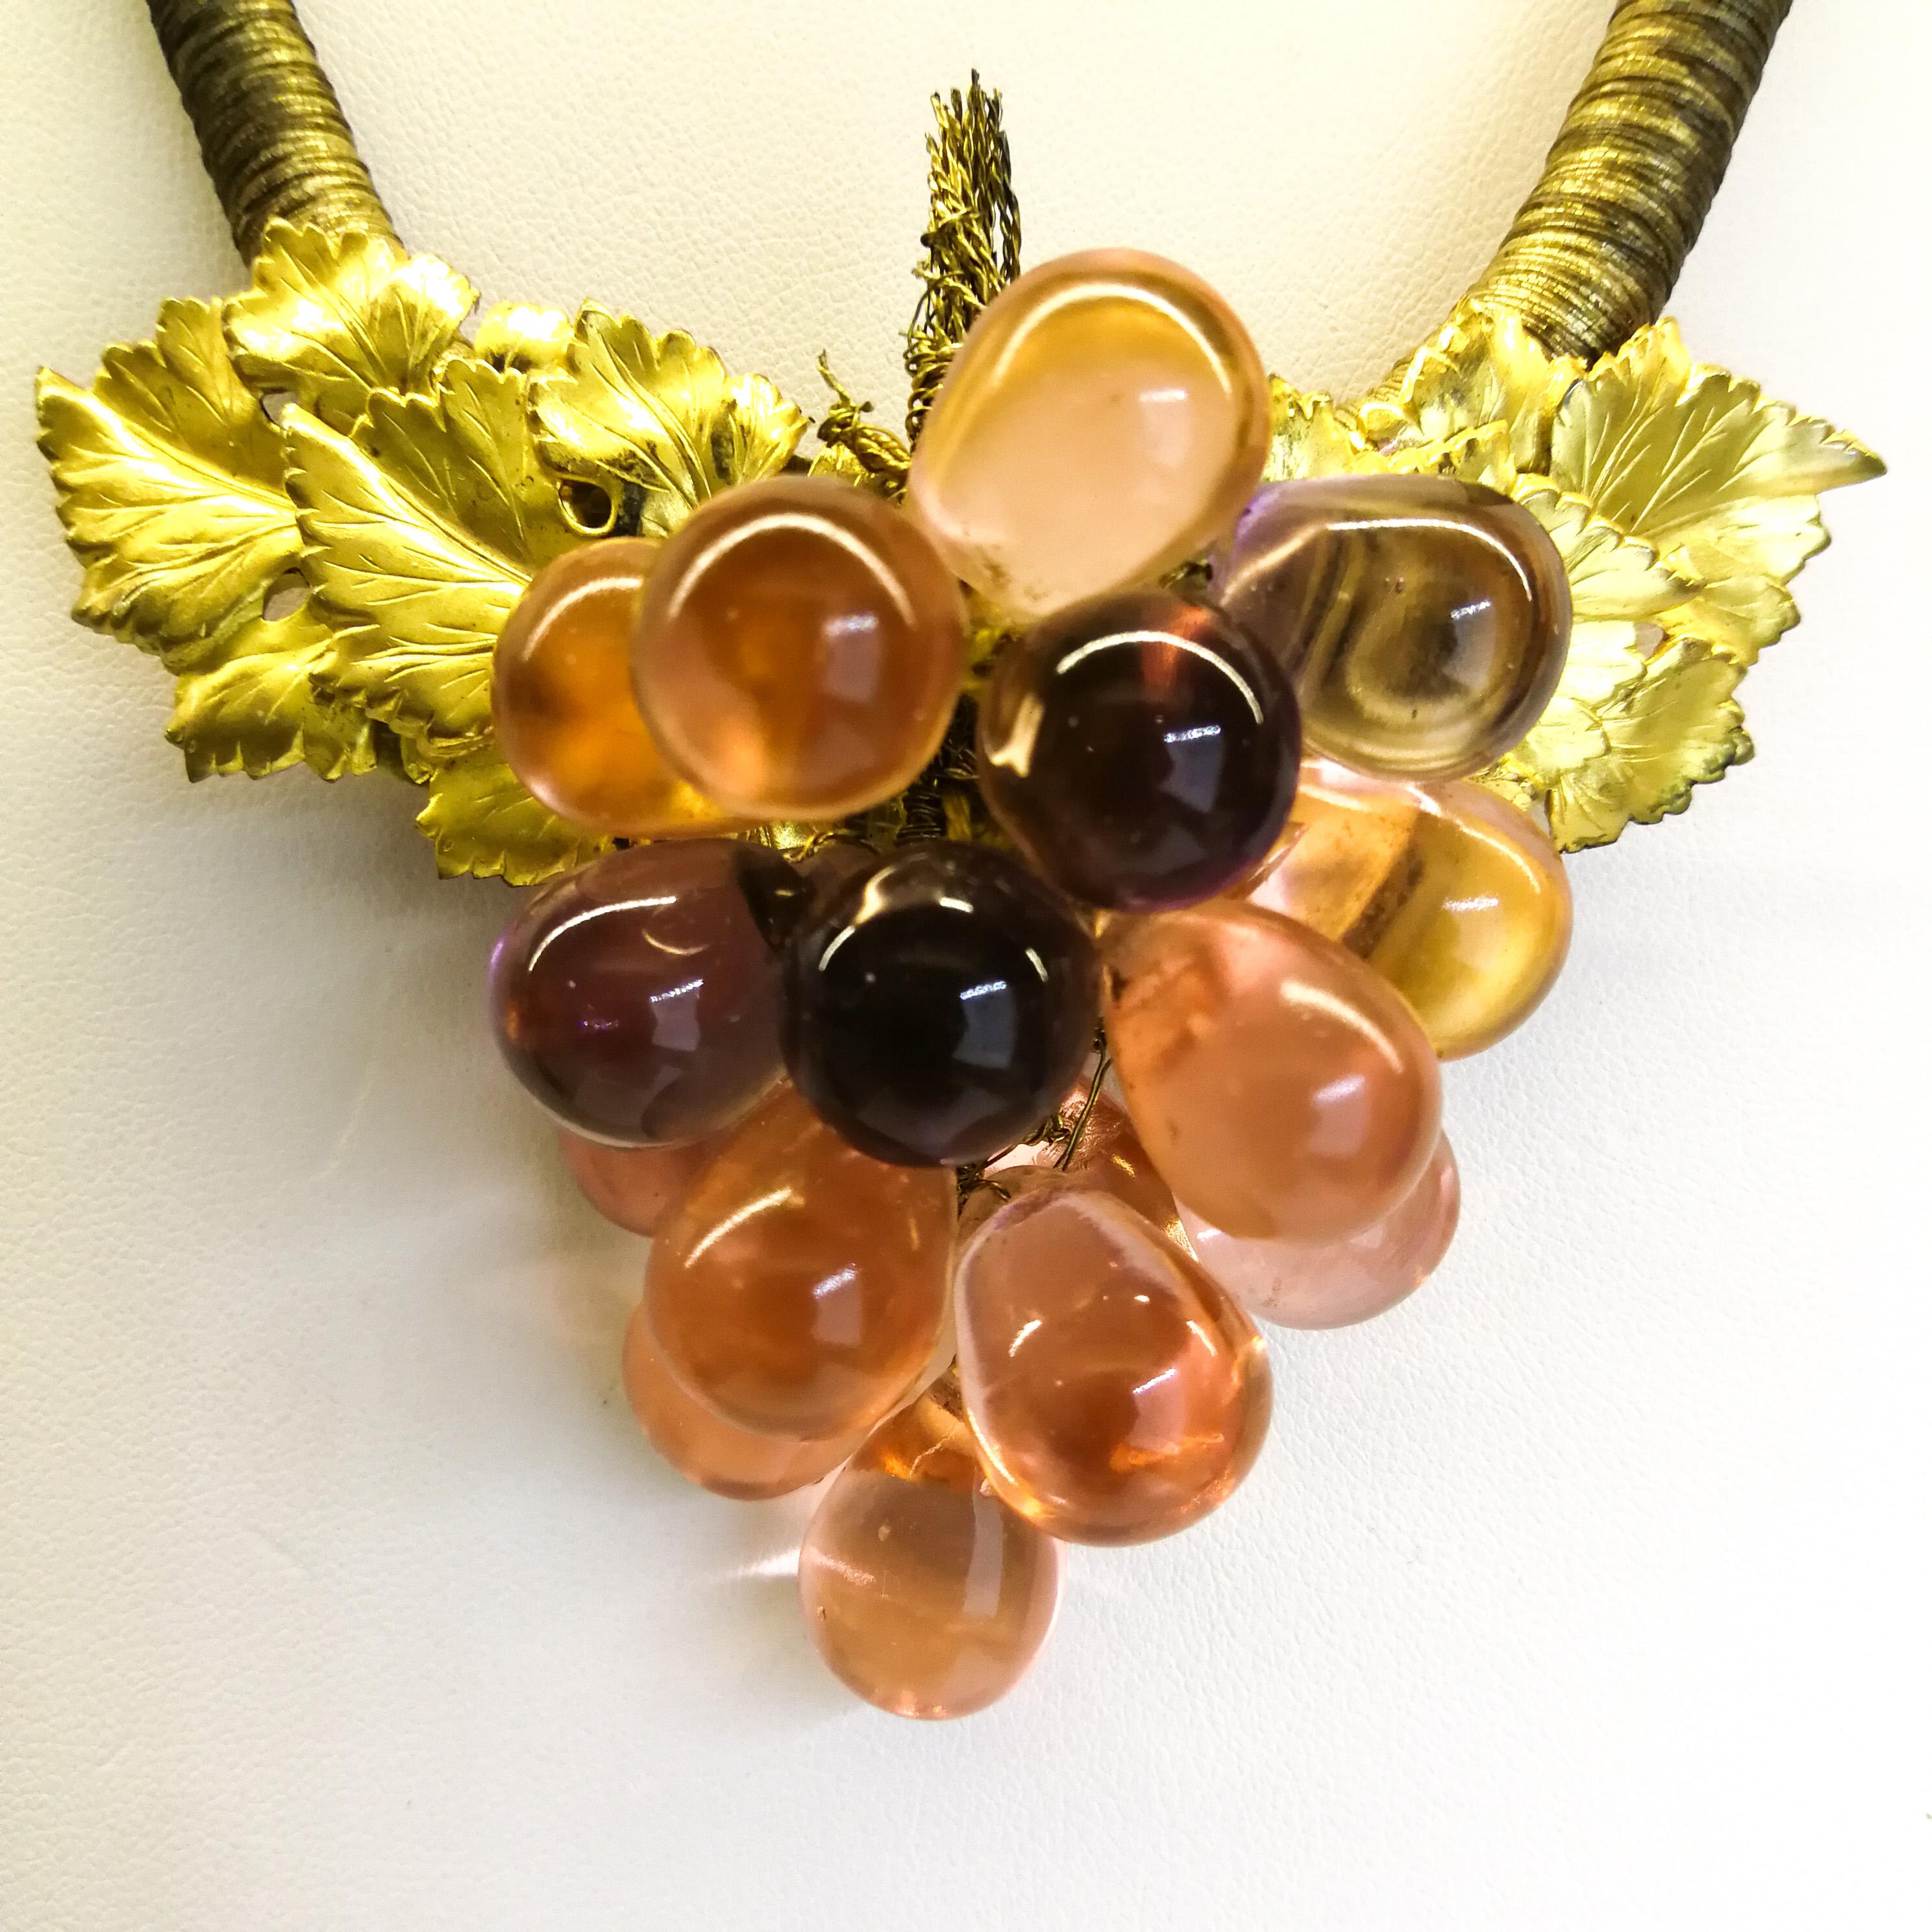 A highly unusual pendant necklace, from the 1920s, with a soft, subtle colour way, a gentle gilding mixed with transparent peach glass 'grapes', all mounted on a graduated necklace that is 'bound' in faded gilt bullion thread, with a distinctive